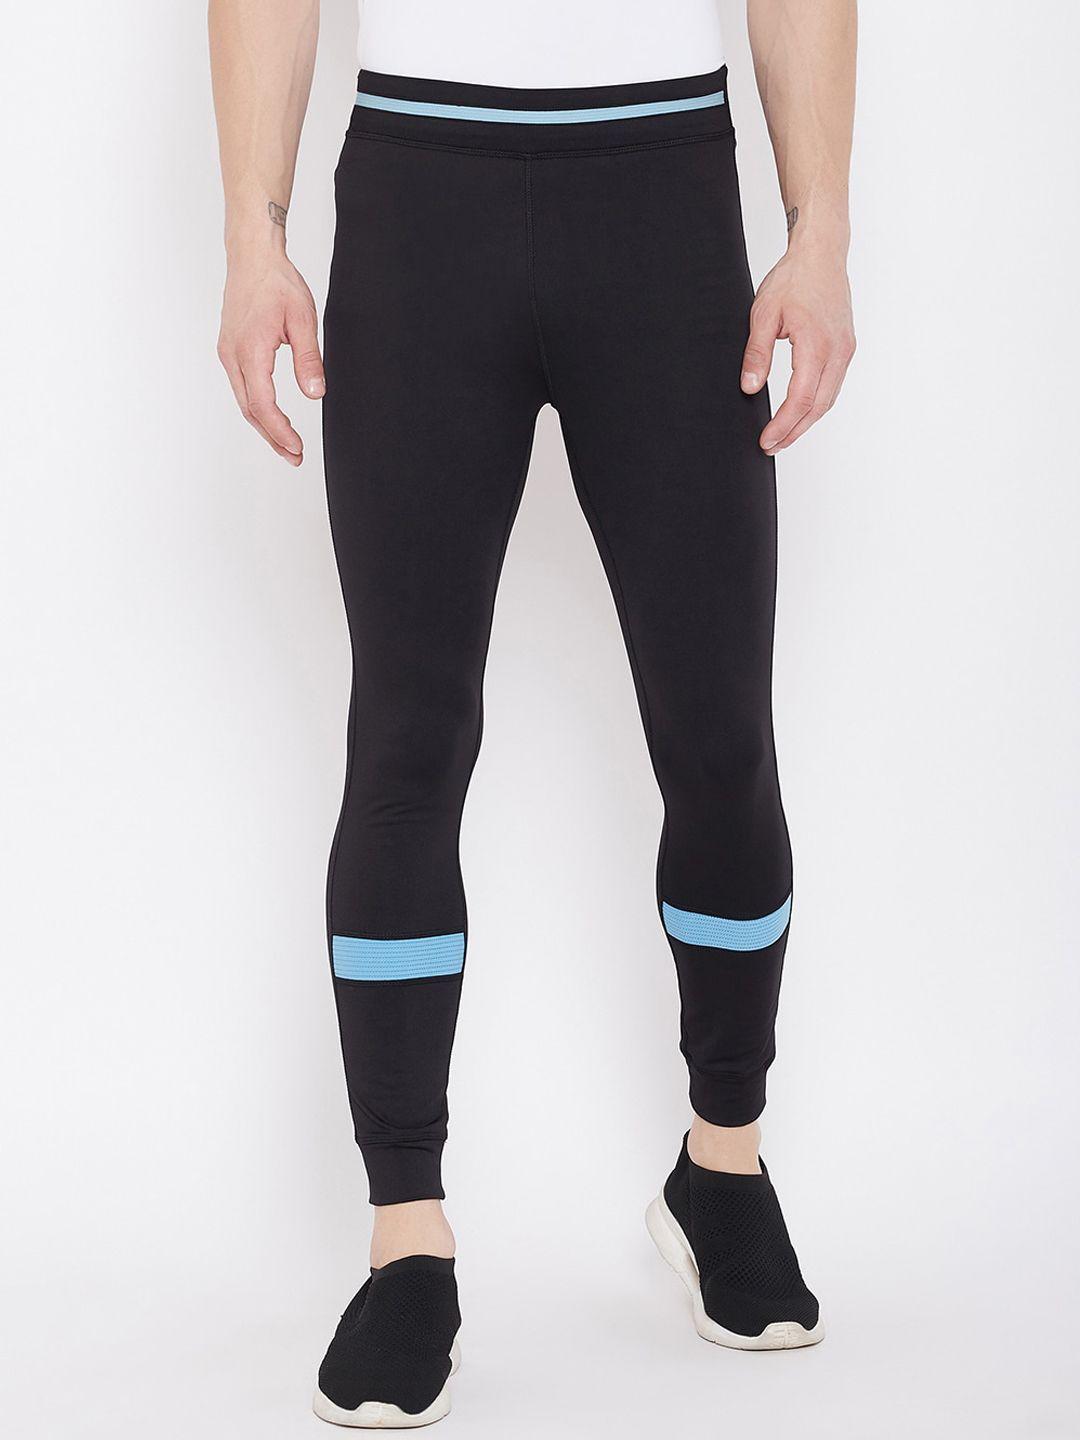 jump usa men black & turquoise blue active wear tights